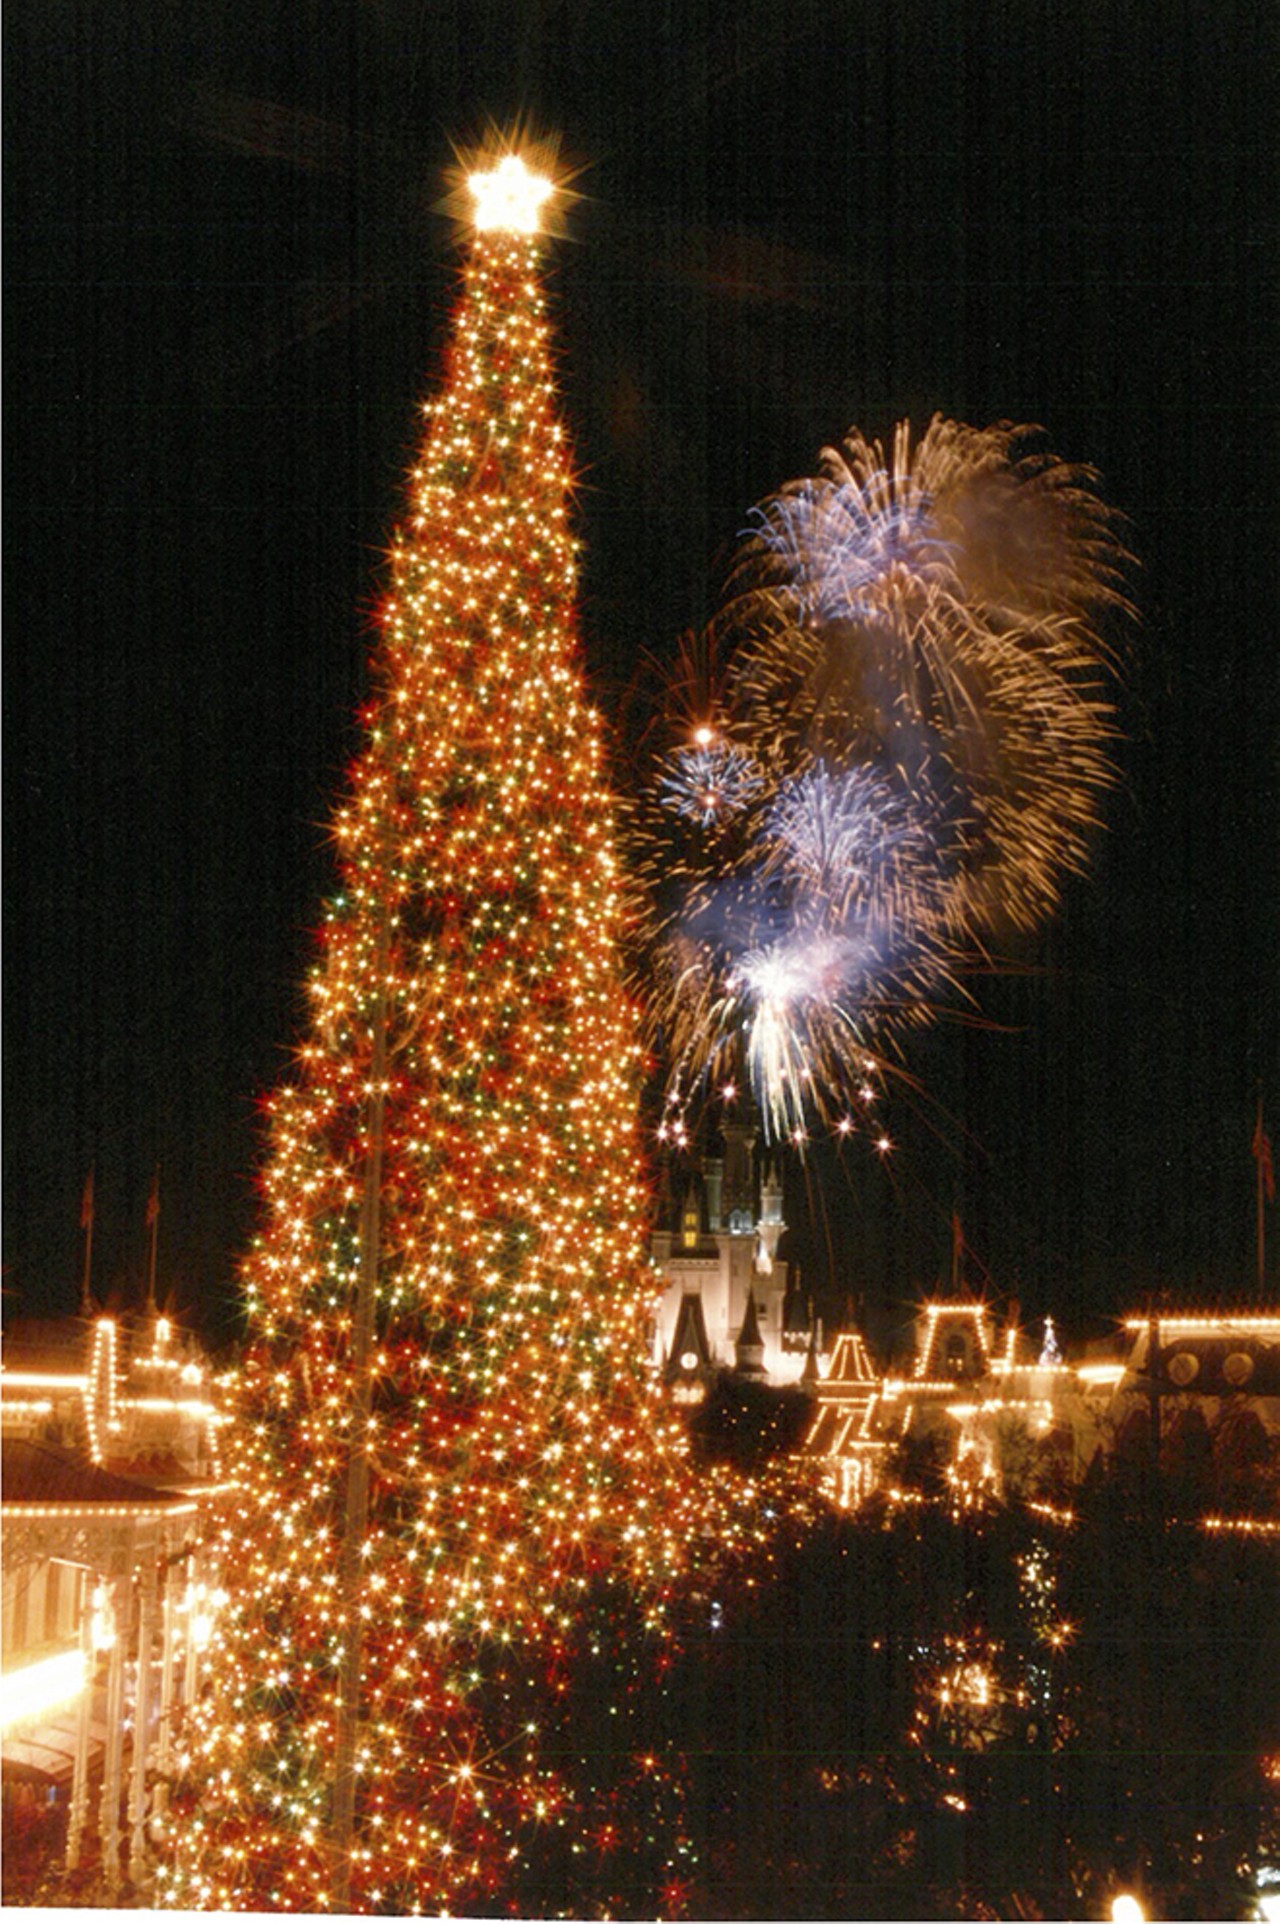 Fireworks explode behind a massive Christmas tree in the Magic Kingdom. 1991.